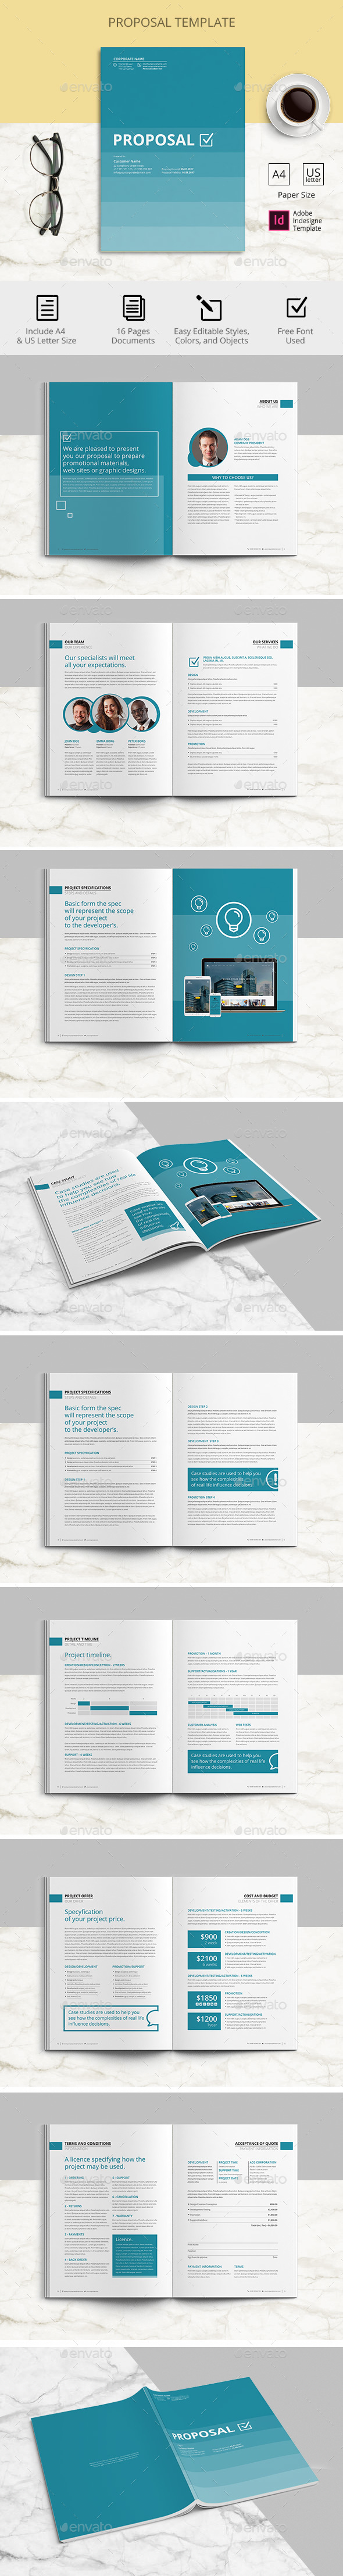 Proposal Adobe Indesign Template